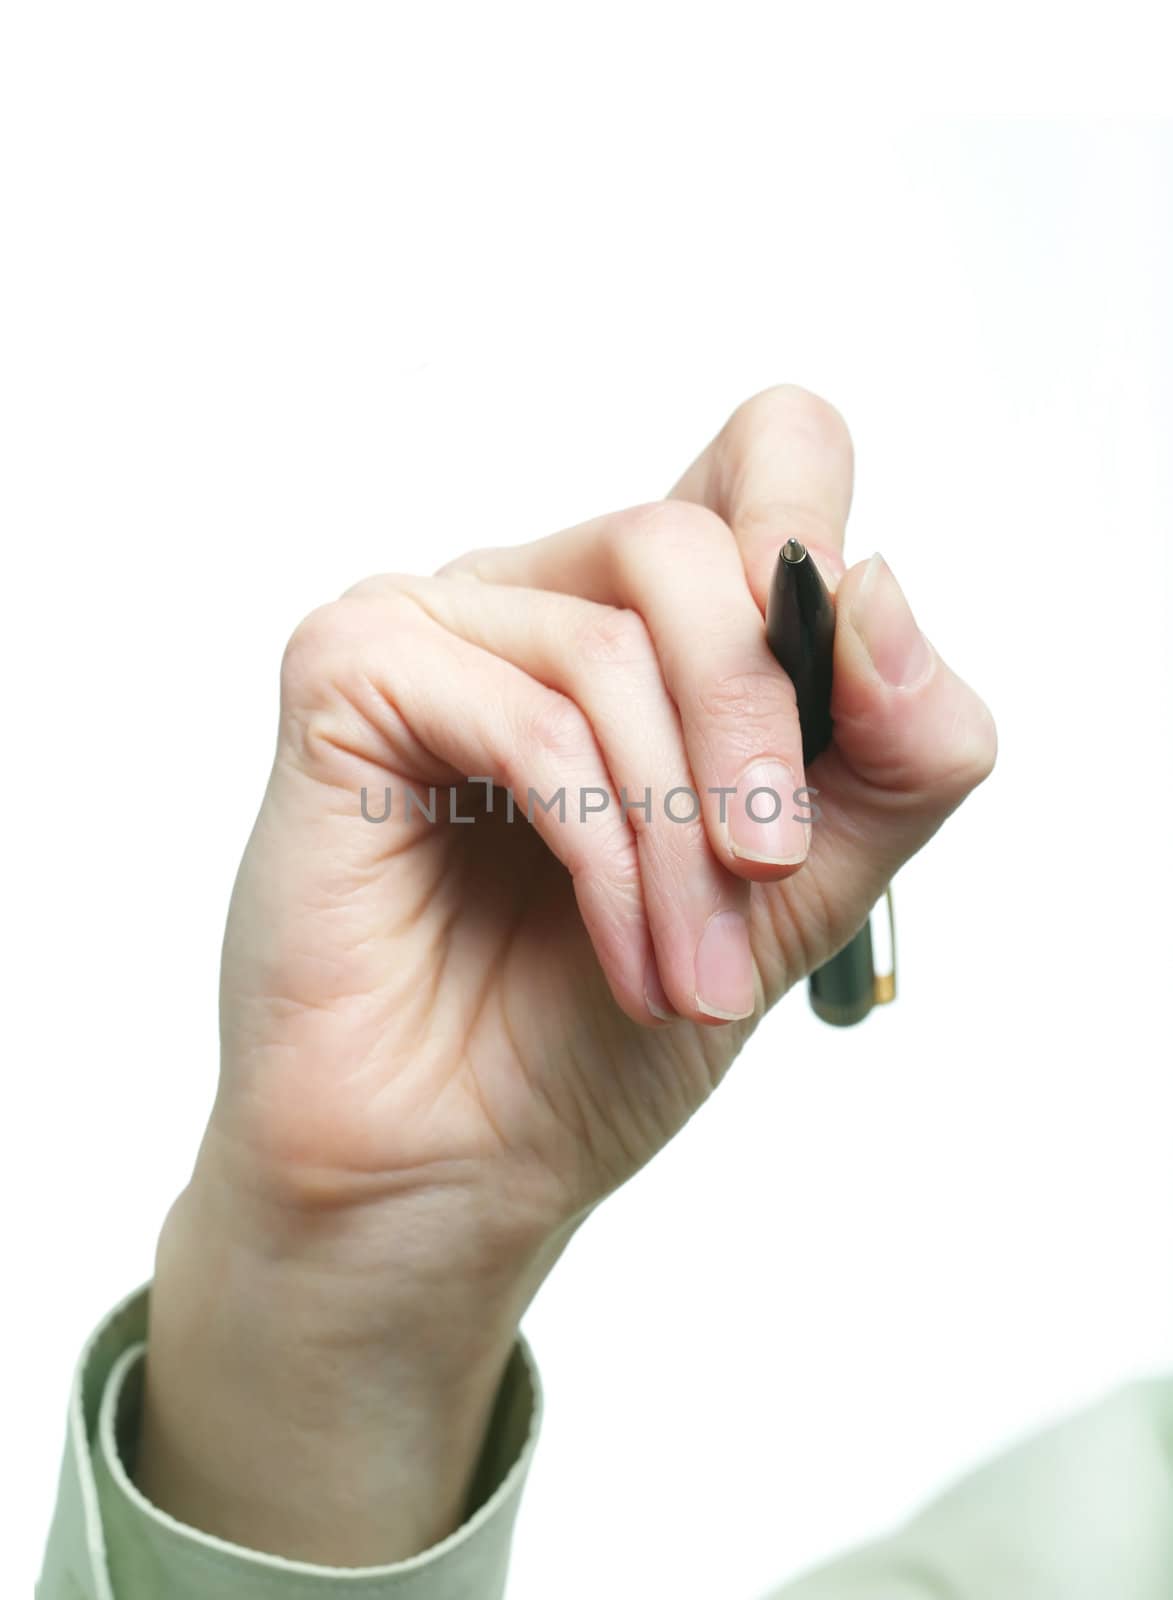 An image of a hand with a black pen 